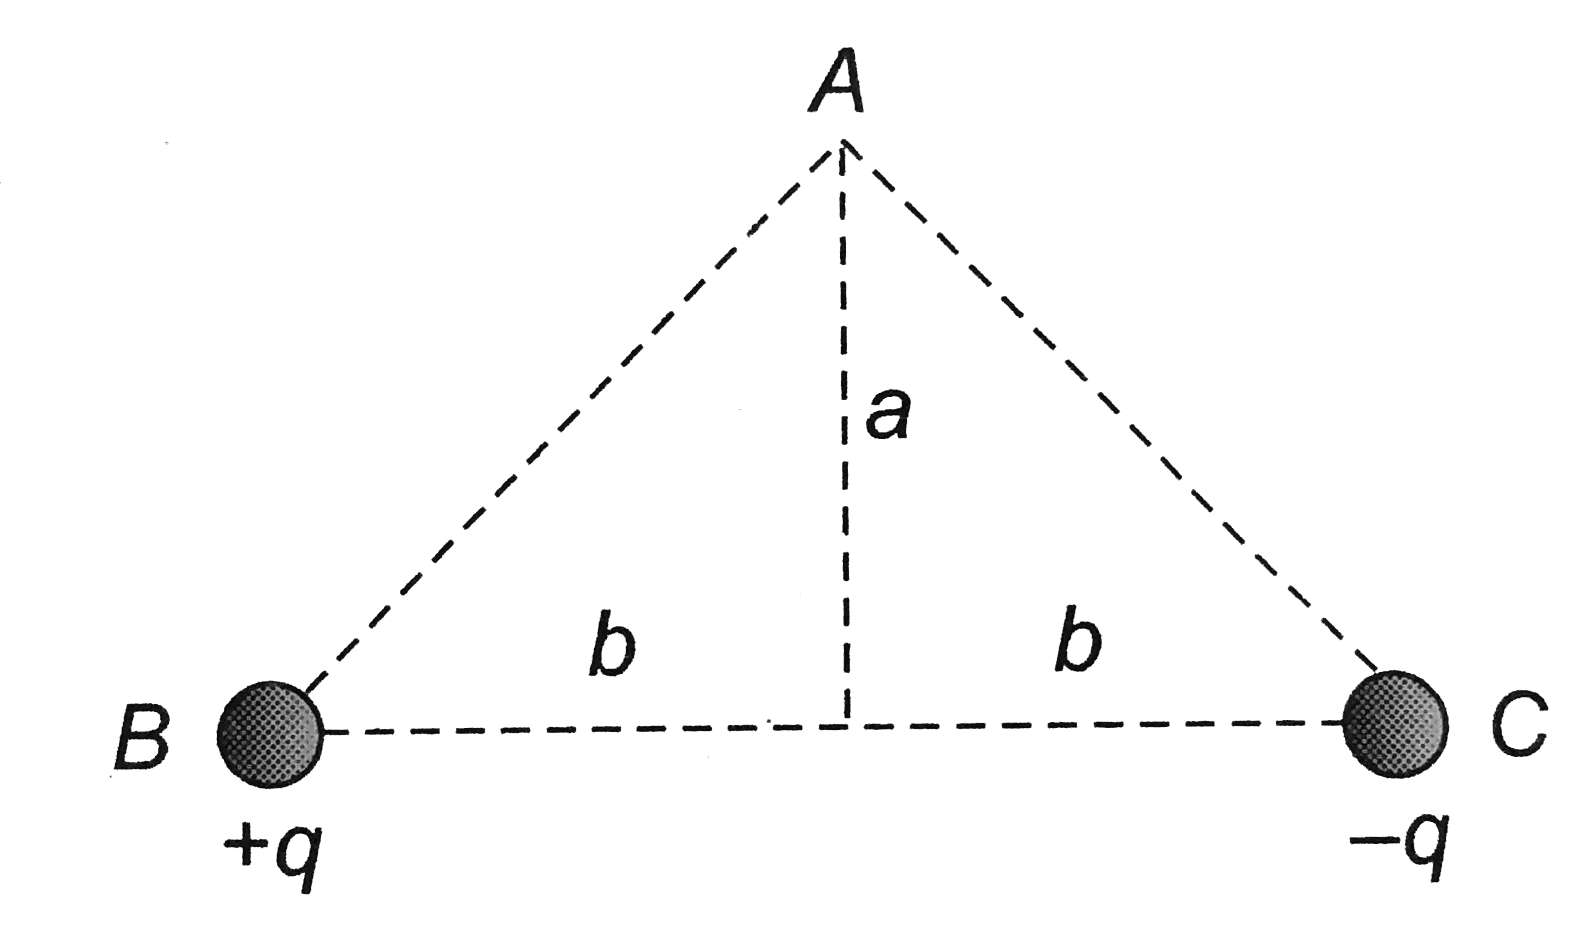 As shown in the figure, charges +q and -q are placed at the vertices B and C of an isoscles triangle. The potential at the vertex A is